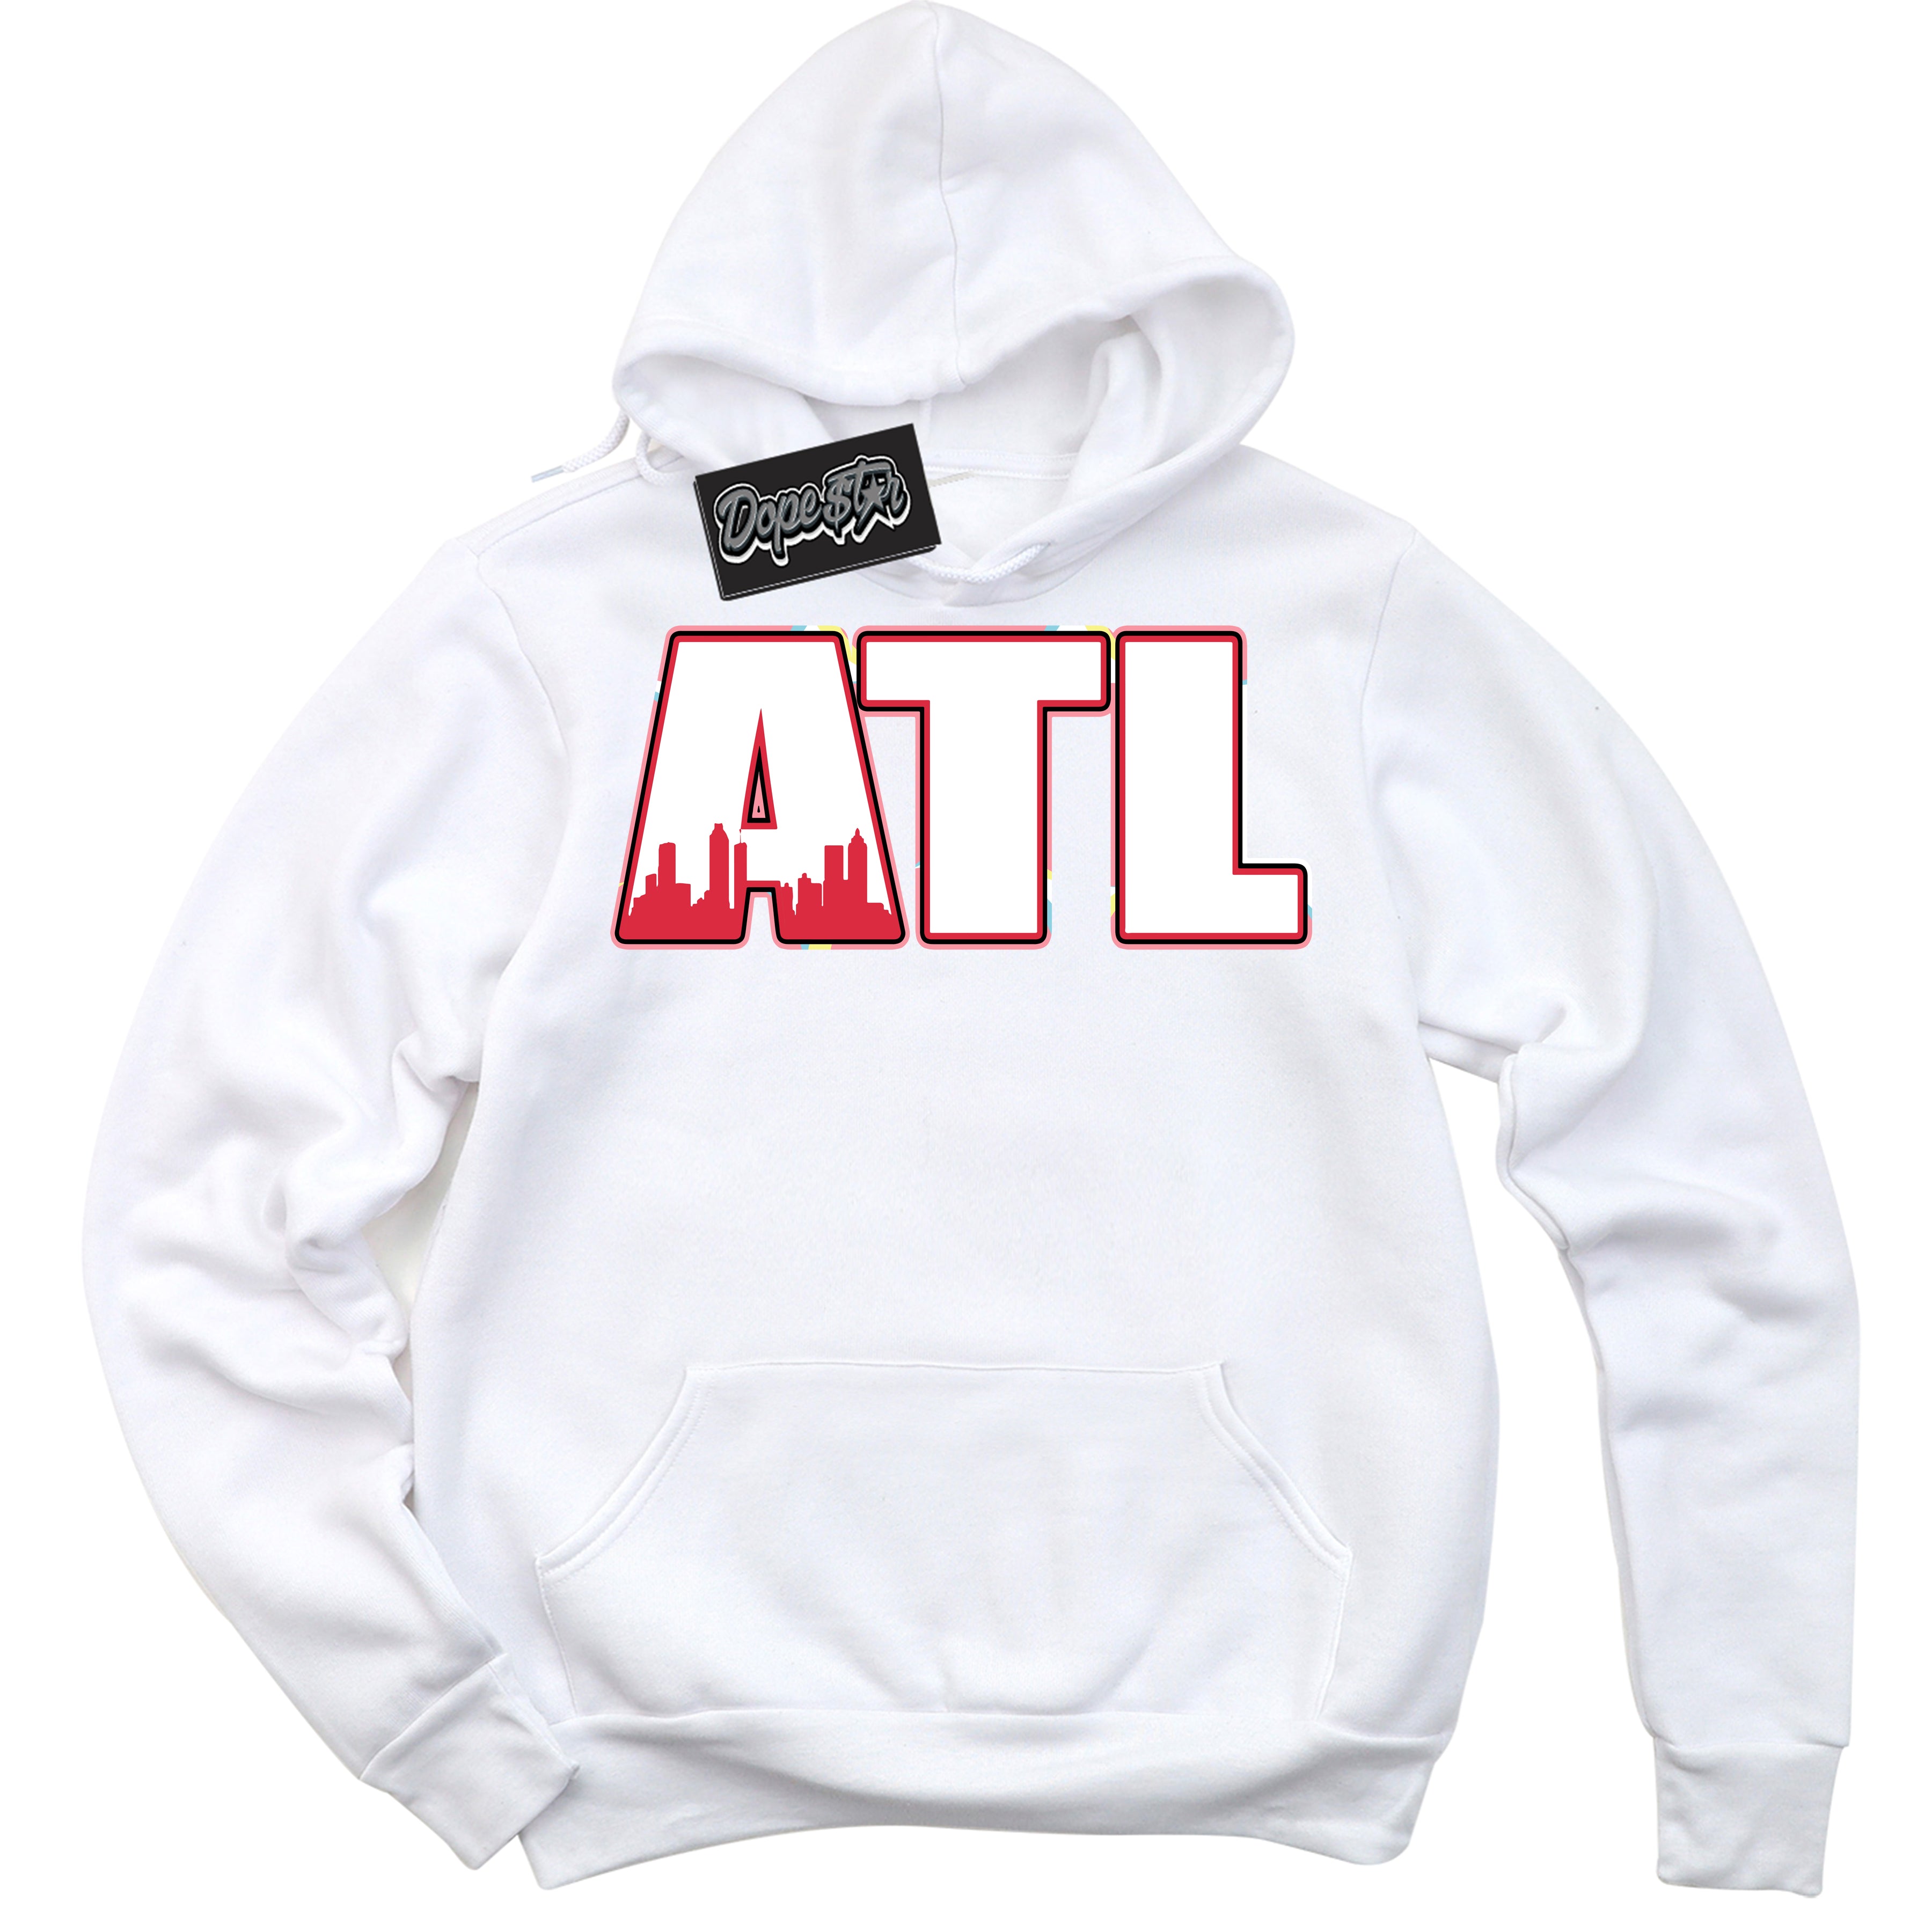 Cool White Graphic DopeStar Hoodie with “ Atlanta “ print, that perfectly matches Spider-Verse 1s sneakers